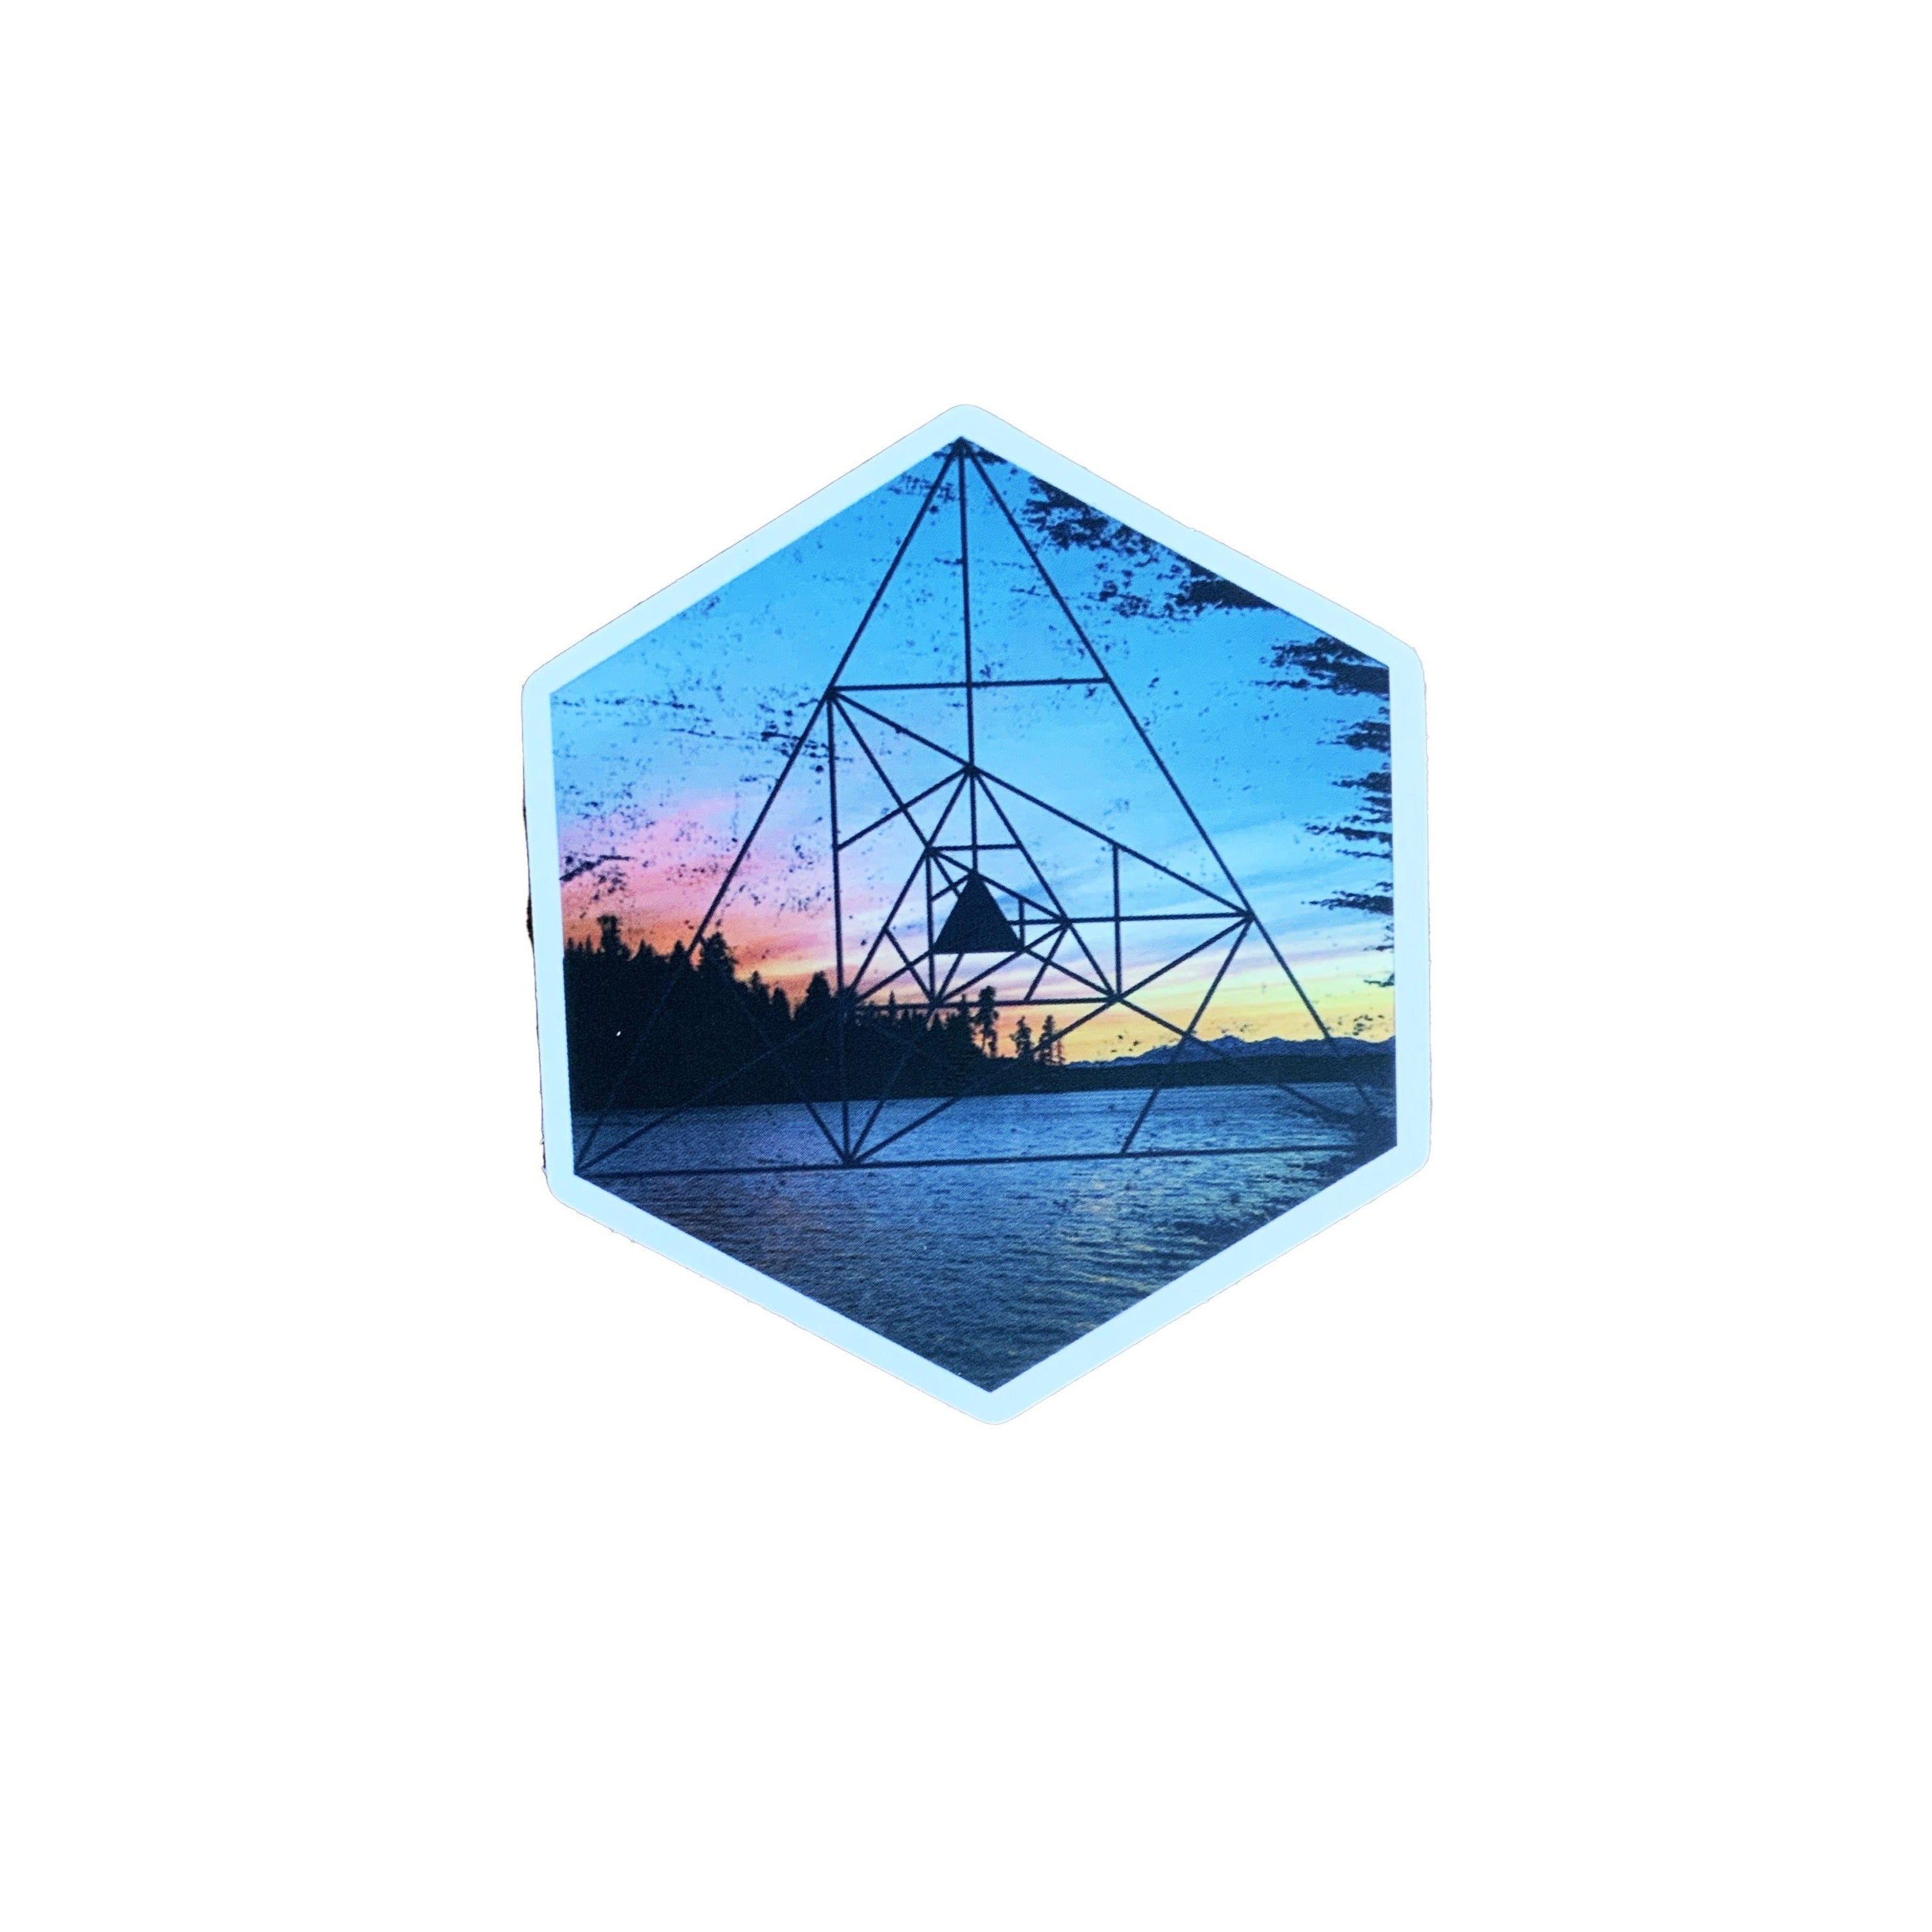 Polygon Sunset Sticker, sticker, Pacific Rayne, Defiance Outdoor Gear Co.